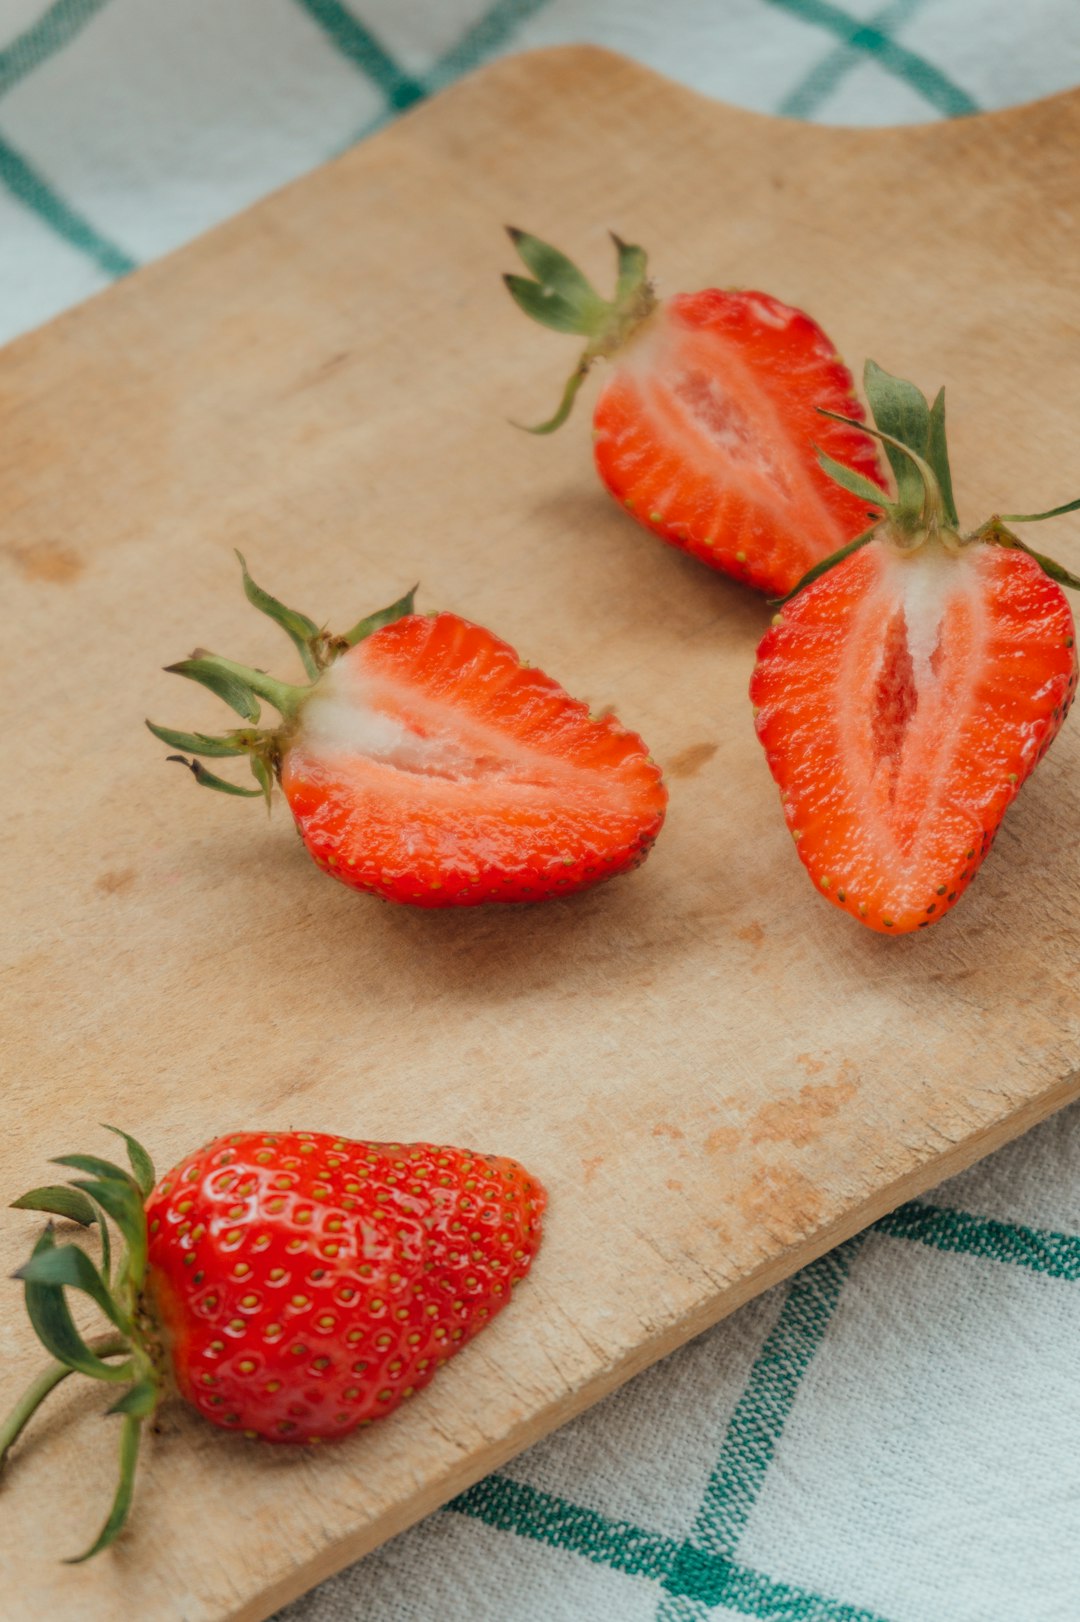 sliced strawberries on brown wooden chopping board